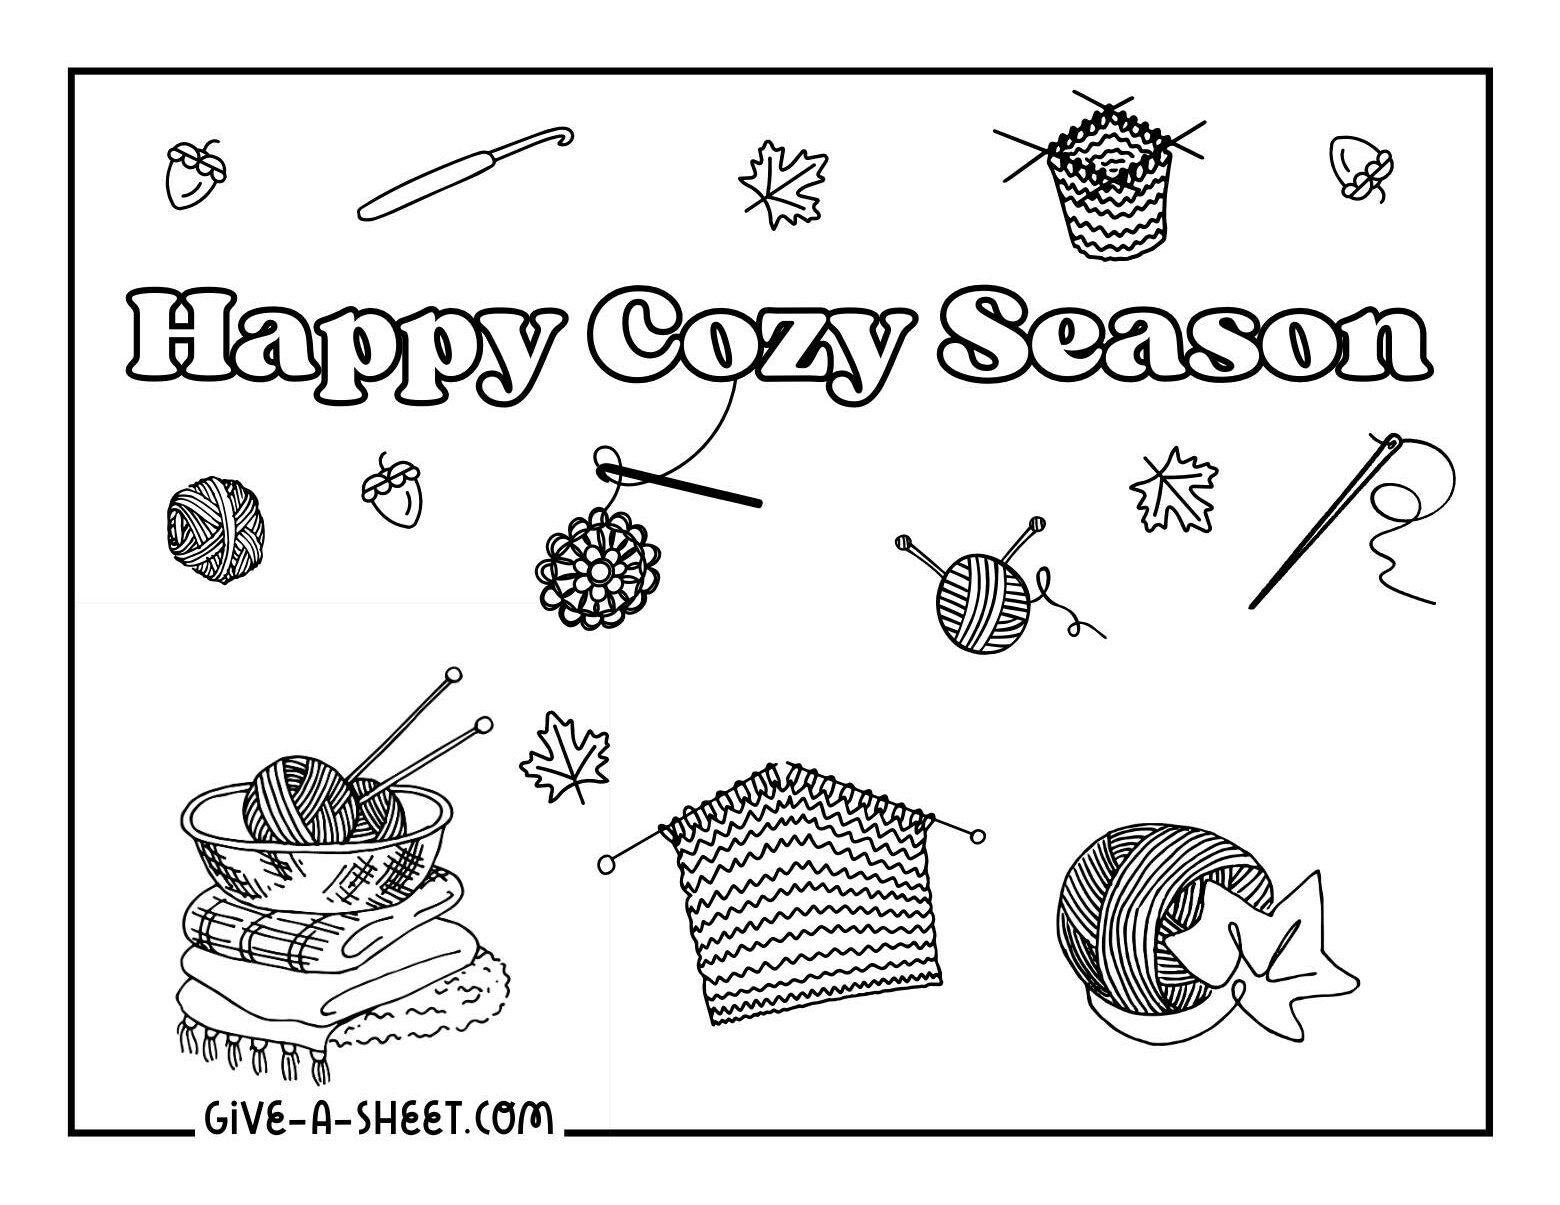 Cozy season crochet and knitting blanket patterns, doily, amigurumi and more coloring page.